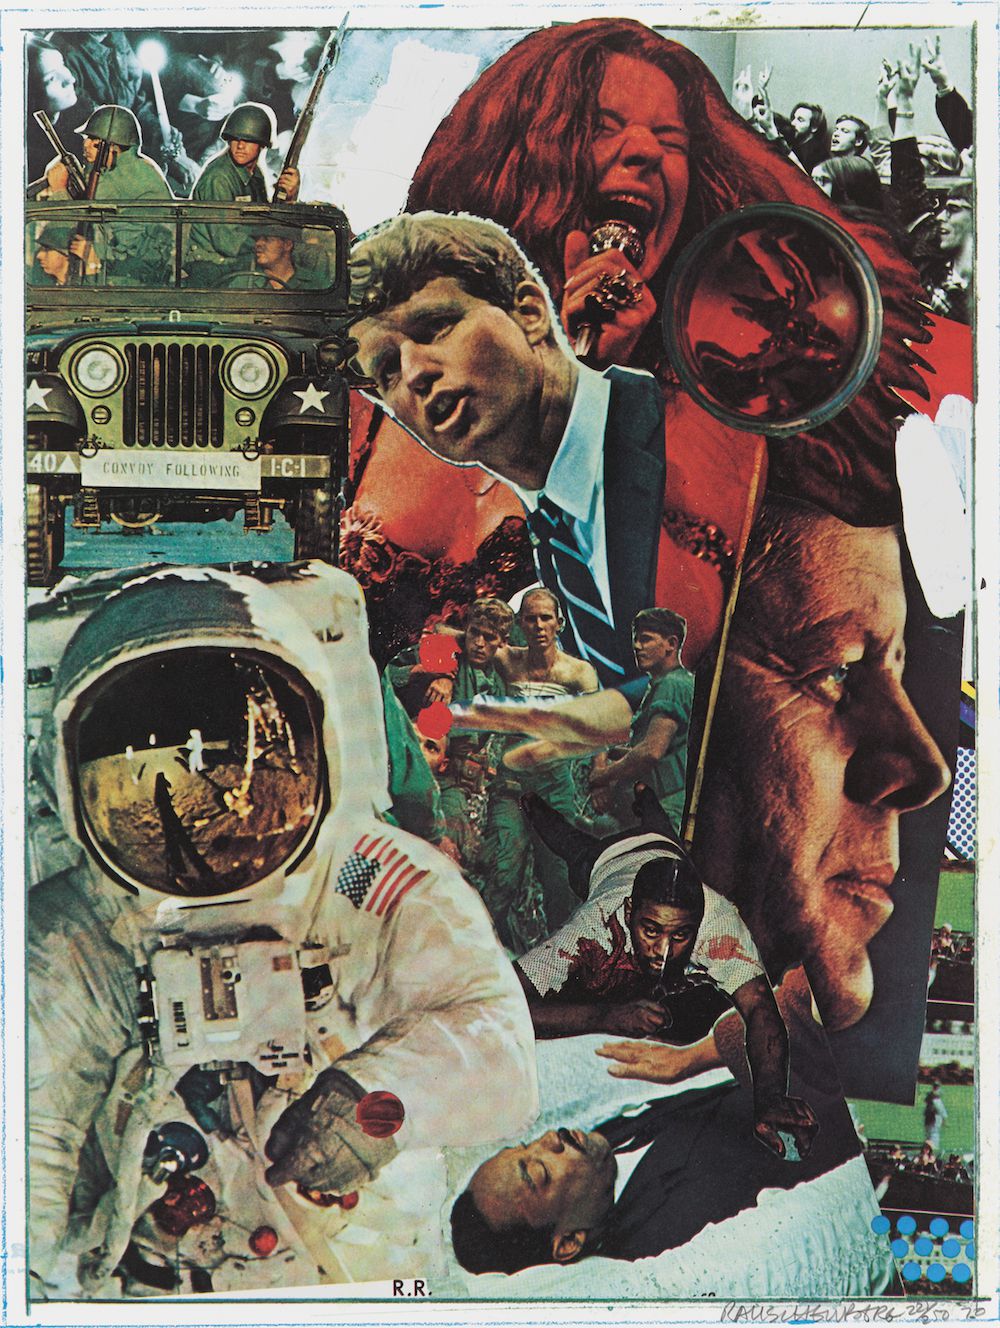 Robert Rauschenberg. Signs. 1970. Screen-print, comp.: 35 3⁄16 × 26 3⁄4 in. (89.4 × 67.9 cm), sheet: 43 × 34 in. (109.2 × 86.4 cm). Publisher: Castelli Graphics, New York. Edition: 250. The Museum of Modern Art, New York. Gift of Leo and Jean-Christophe Castelli in memory of Toiny Castelli. © 2017 Robert Rauschenberg Foundation<br/>